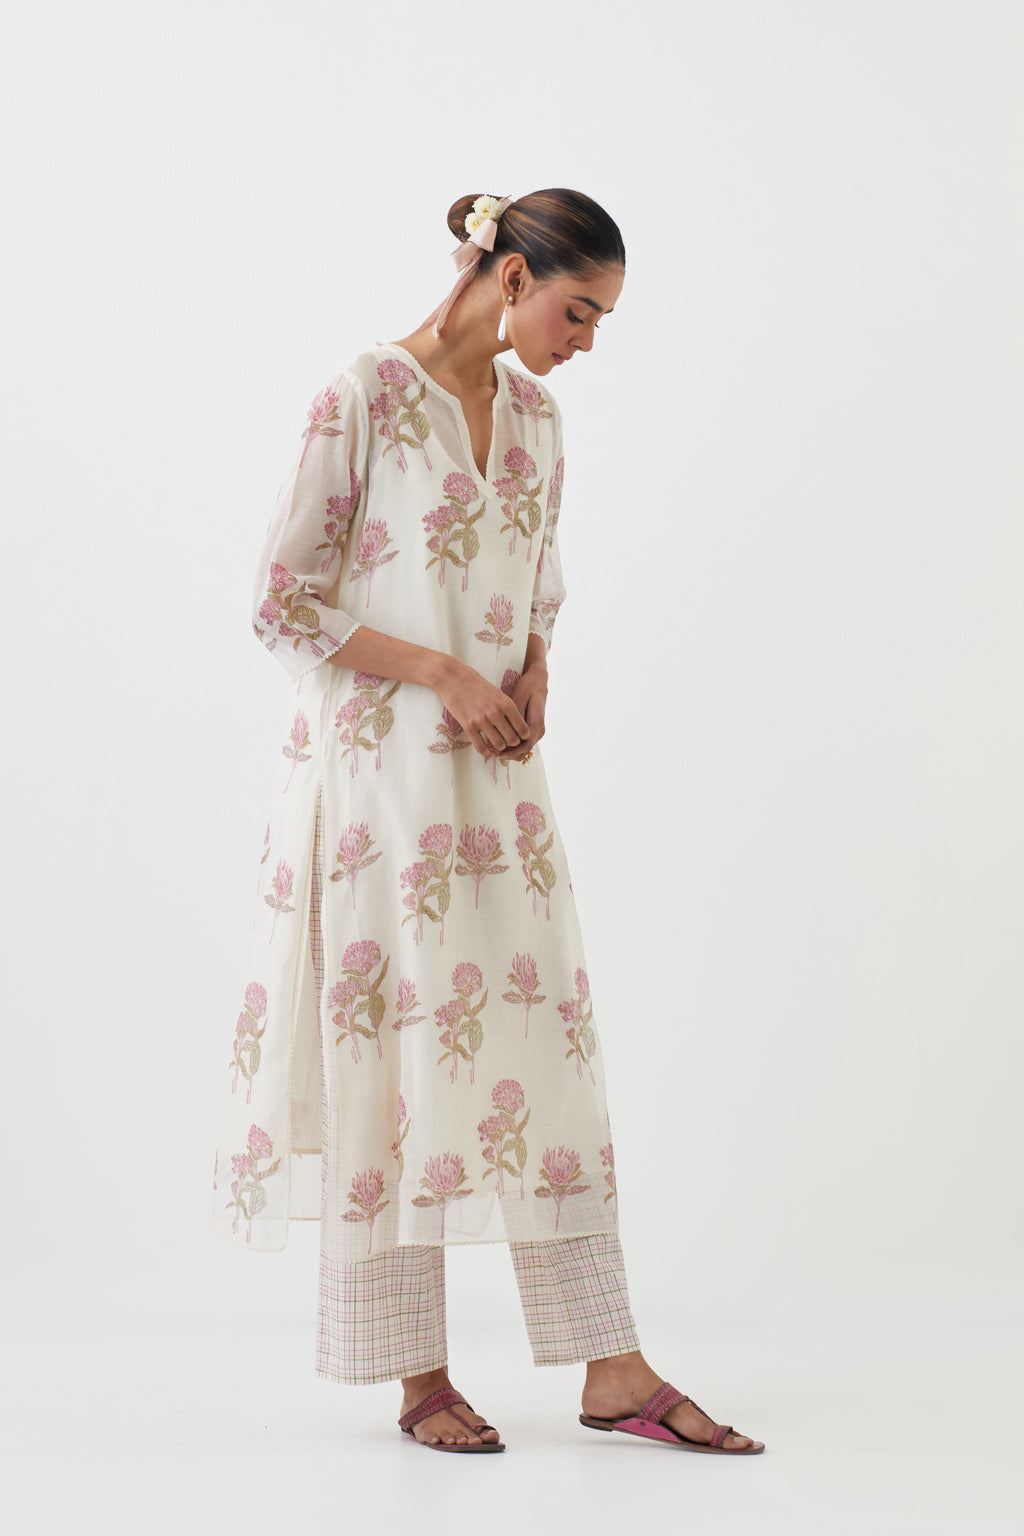 Off white cotton chanderi hand block printed kurta set with all-over pink colored flower.